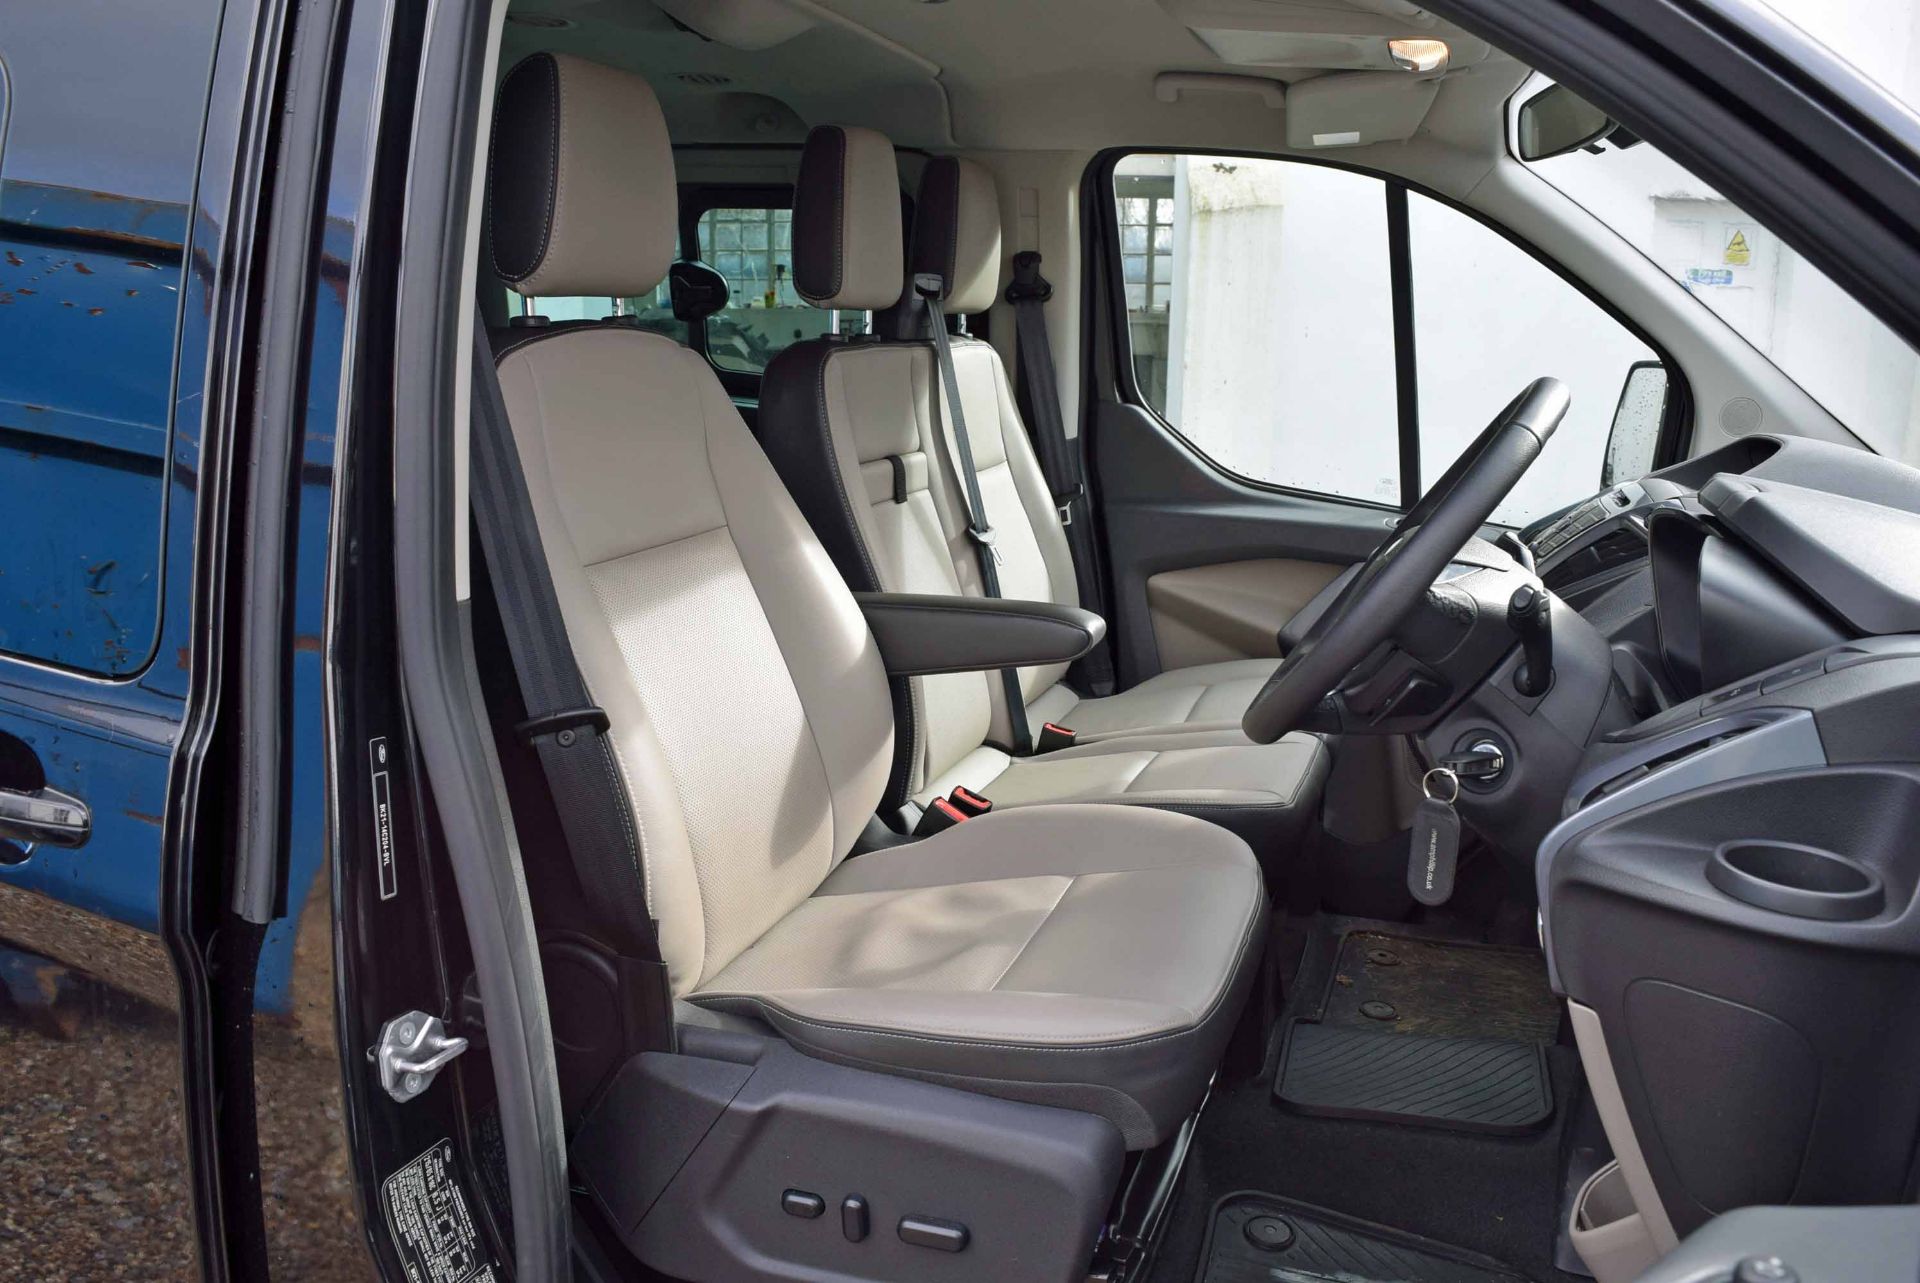 A 2015 FORD Transit Tourneo Custom 300 2.2 Diesel 6-Speed Limited E-Tech Manual MPV, Registration - Image 6 of 11